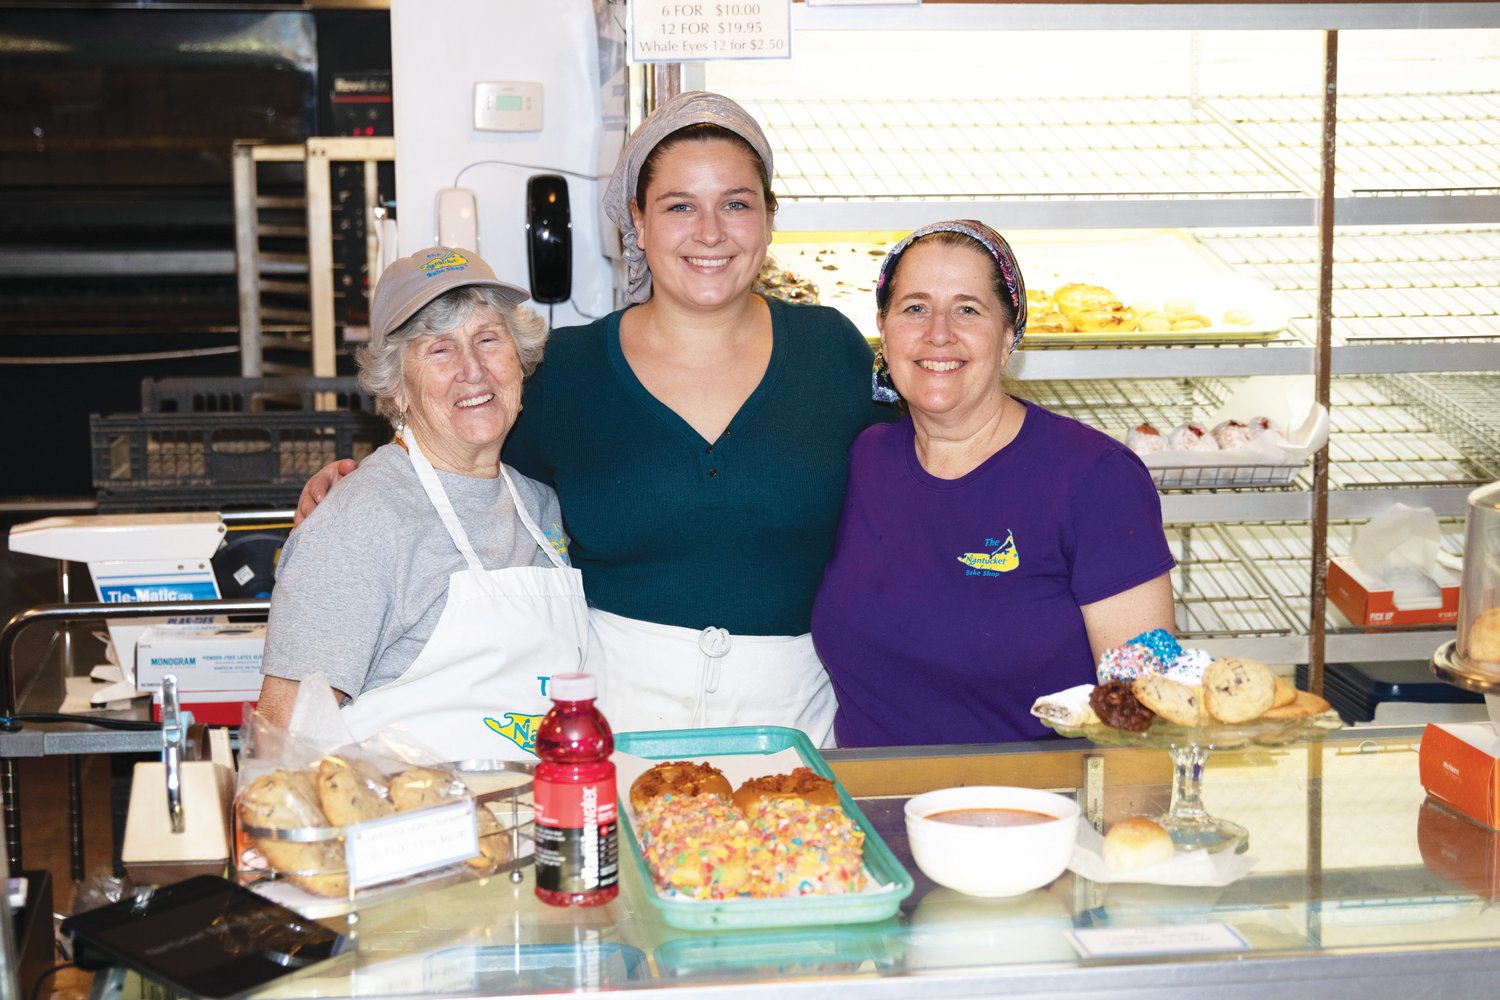 From left, Louise Hubbard, Brittany Watson and Kerry Reilly behind the counter at the Nantucket Bake Shop.